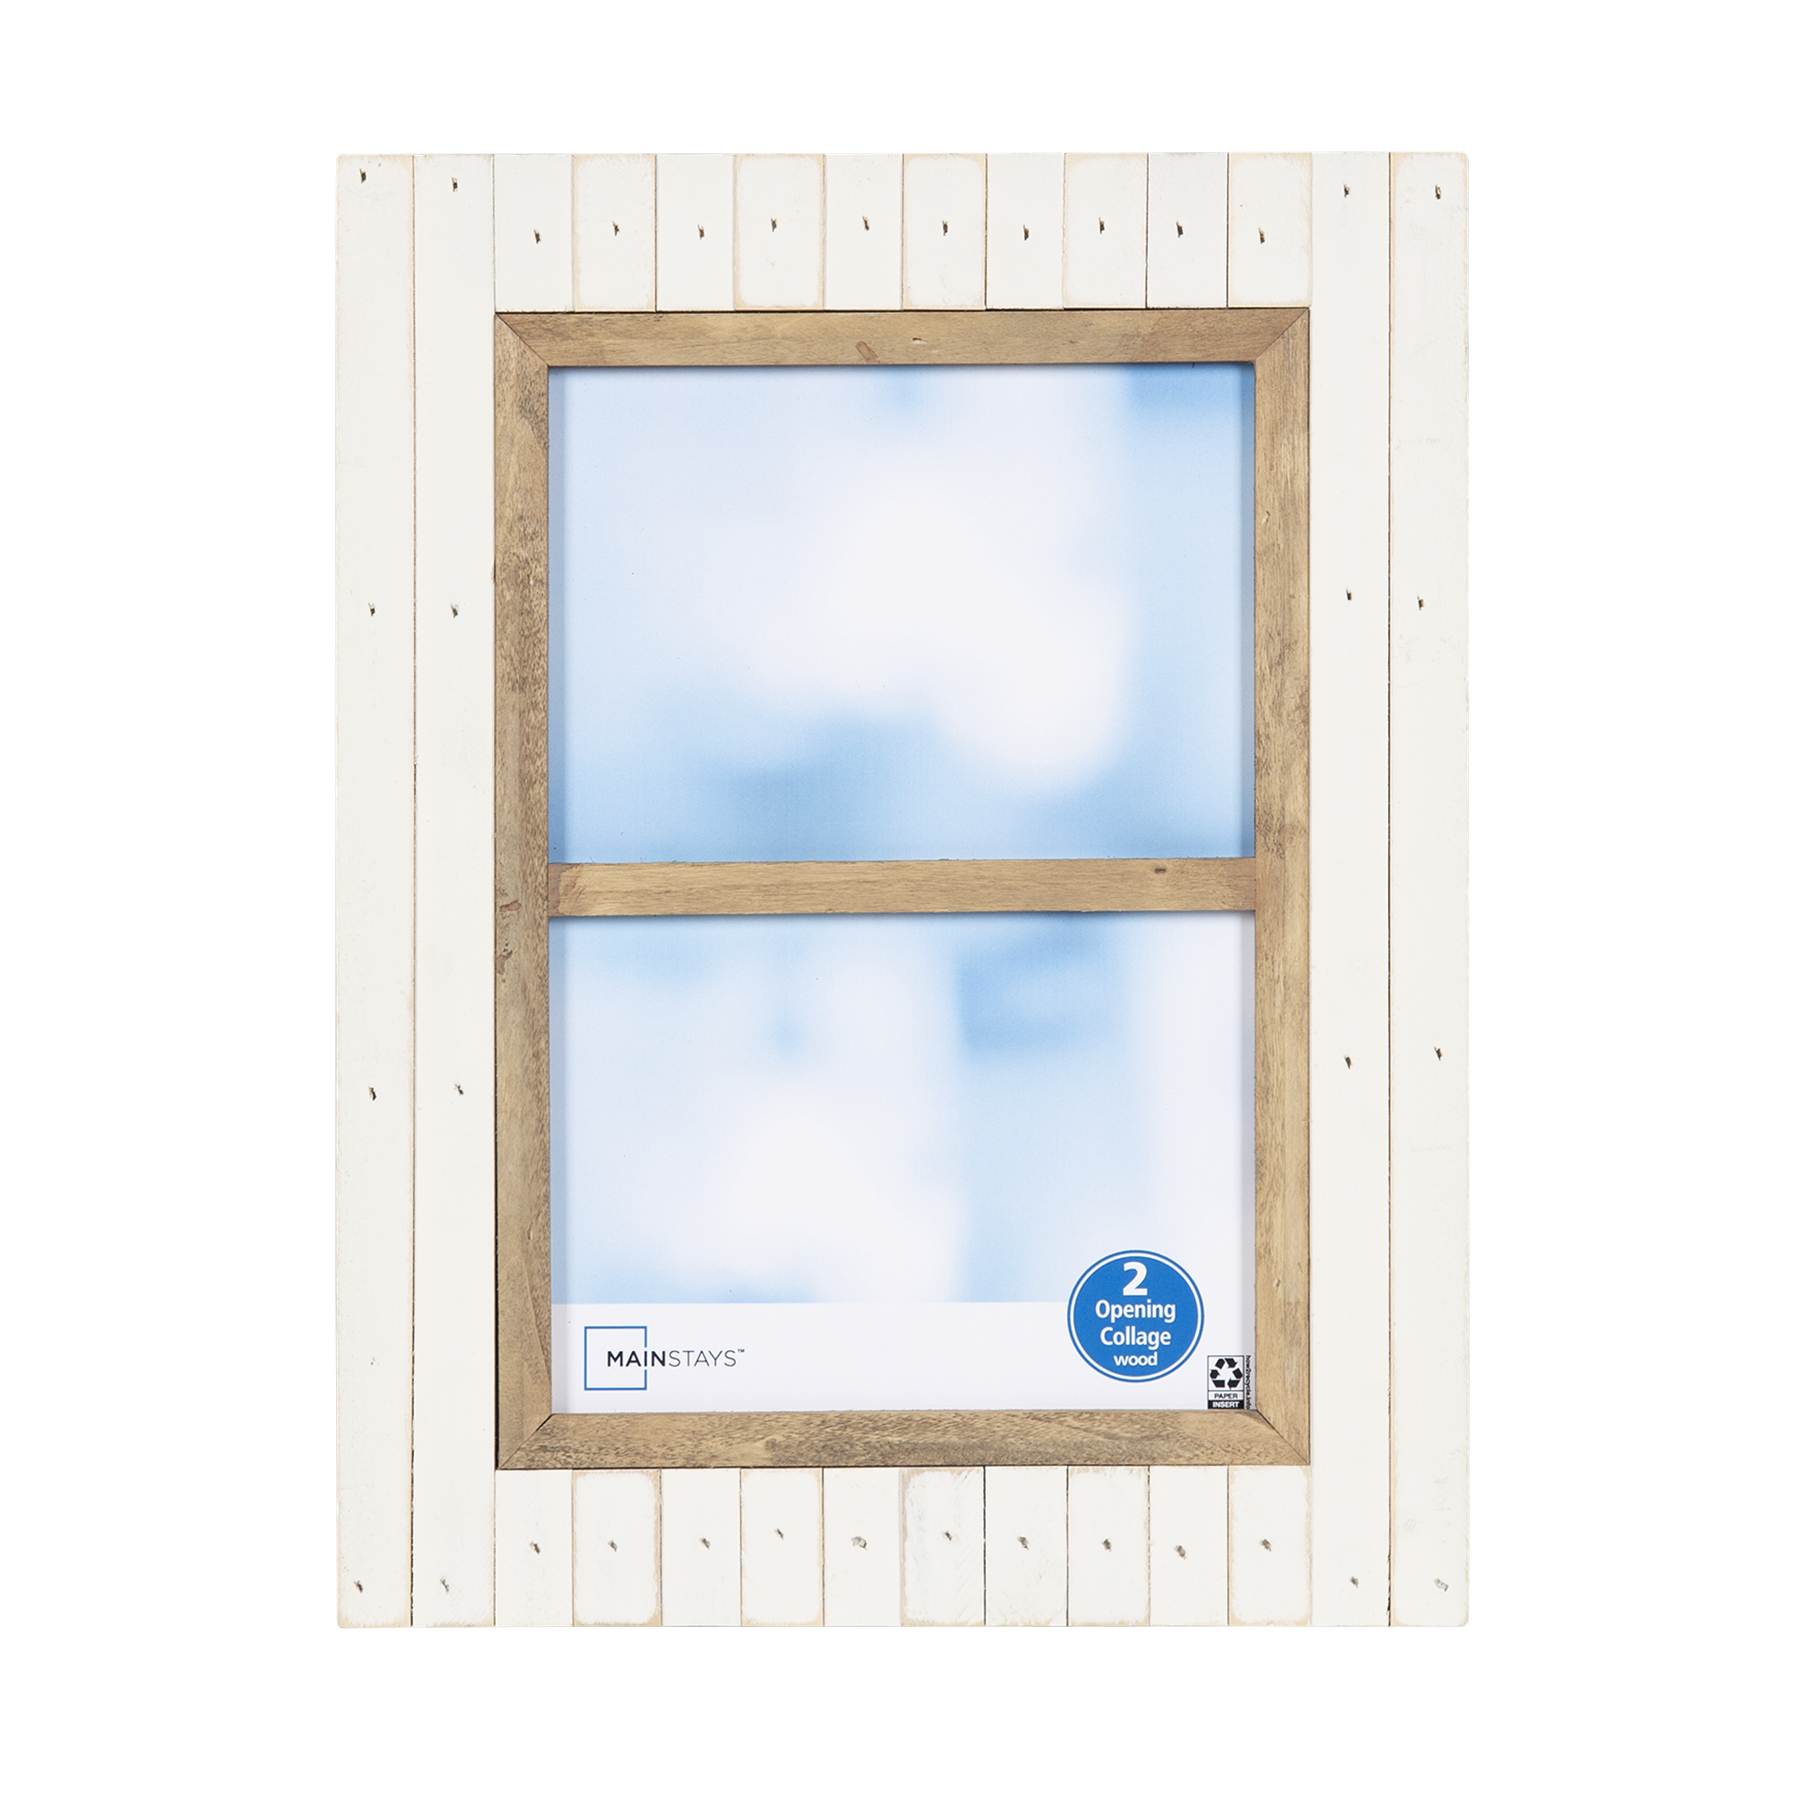 Mainstays Oracoke 2-Opening 5x7 Cream Collage Picture Frame - image 1 of 6